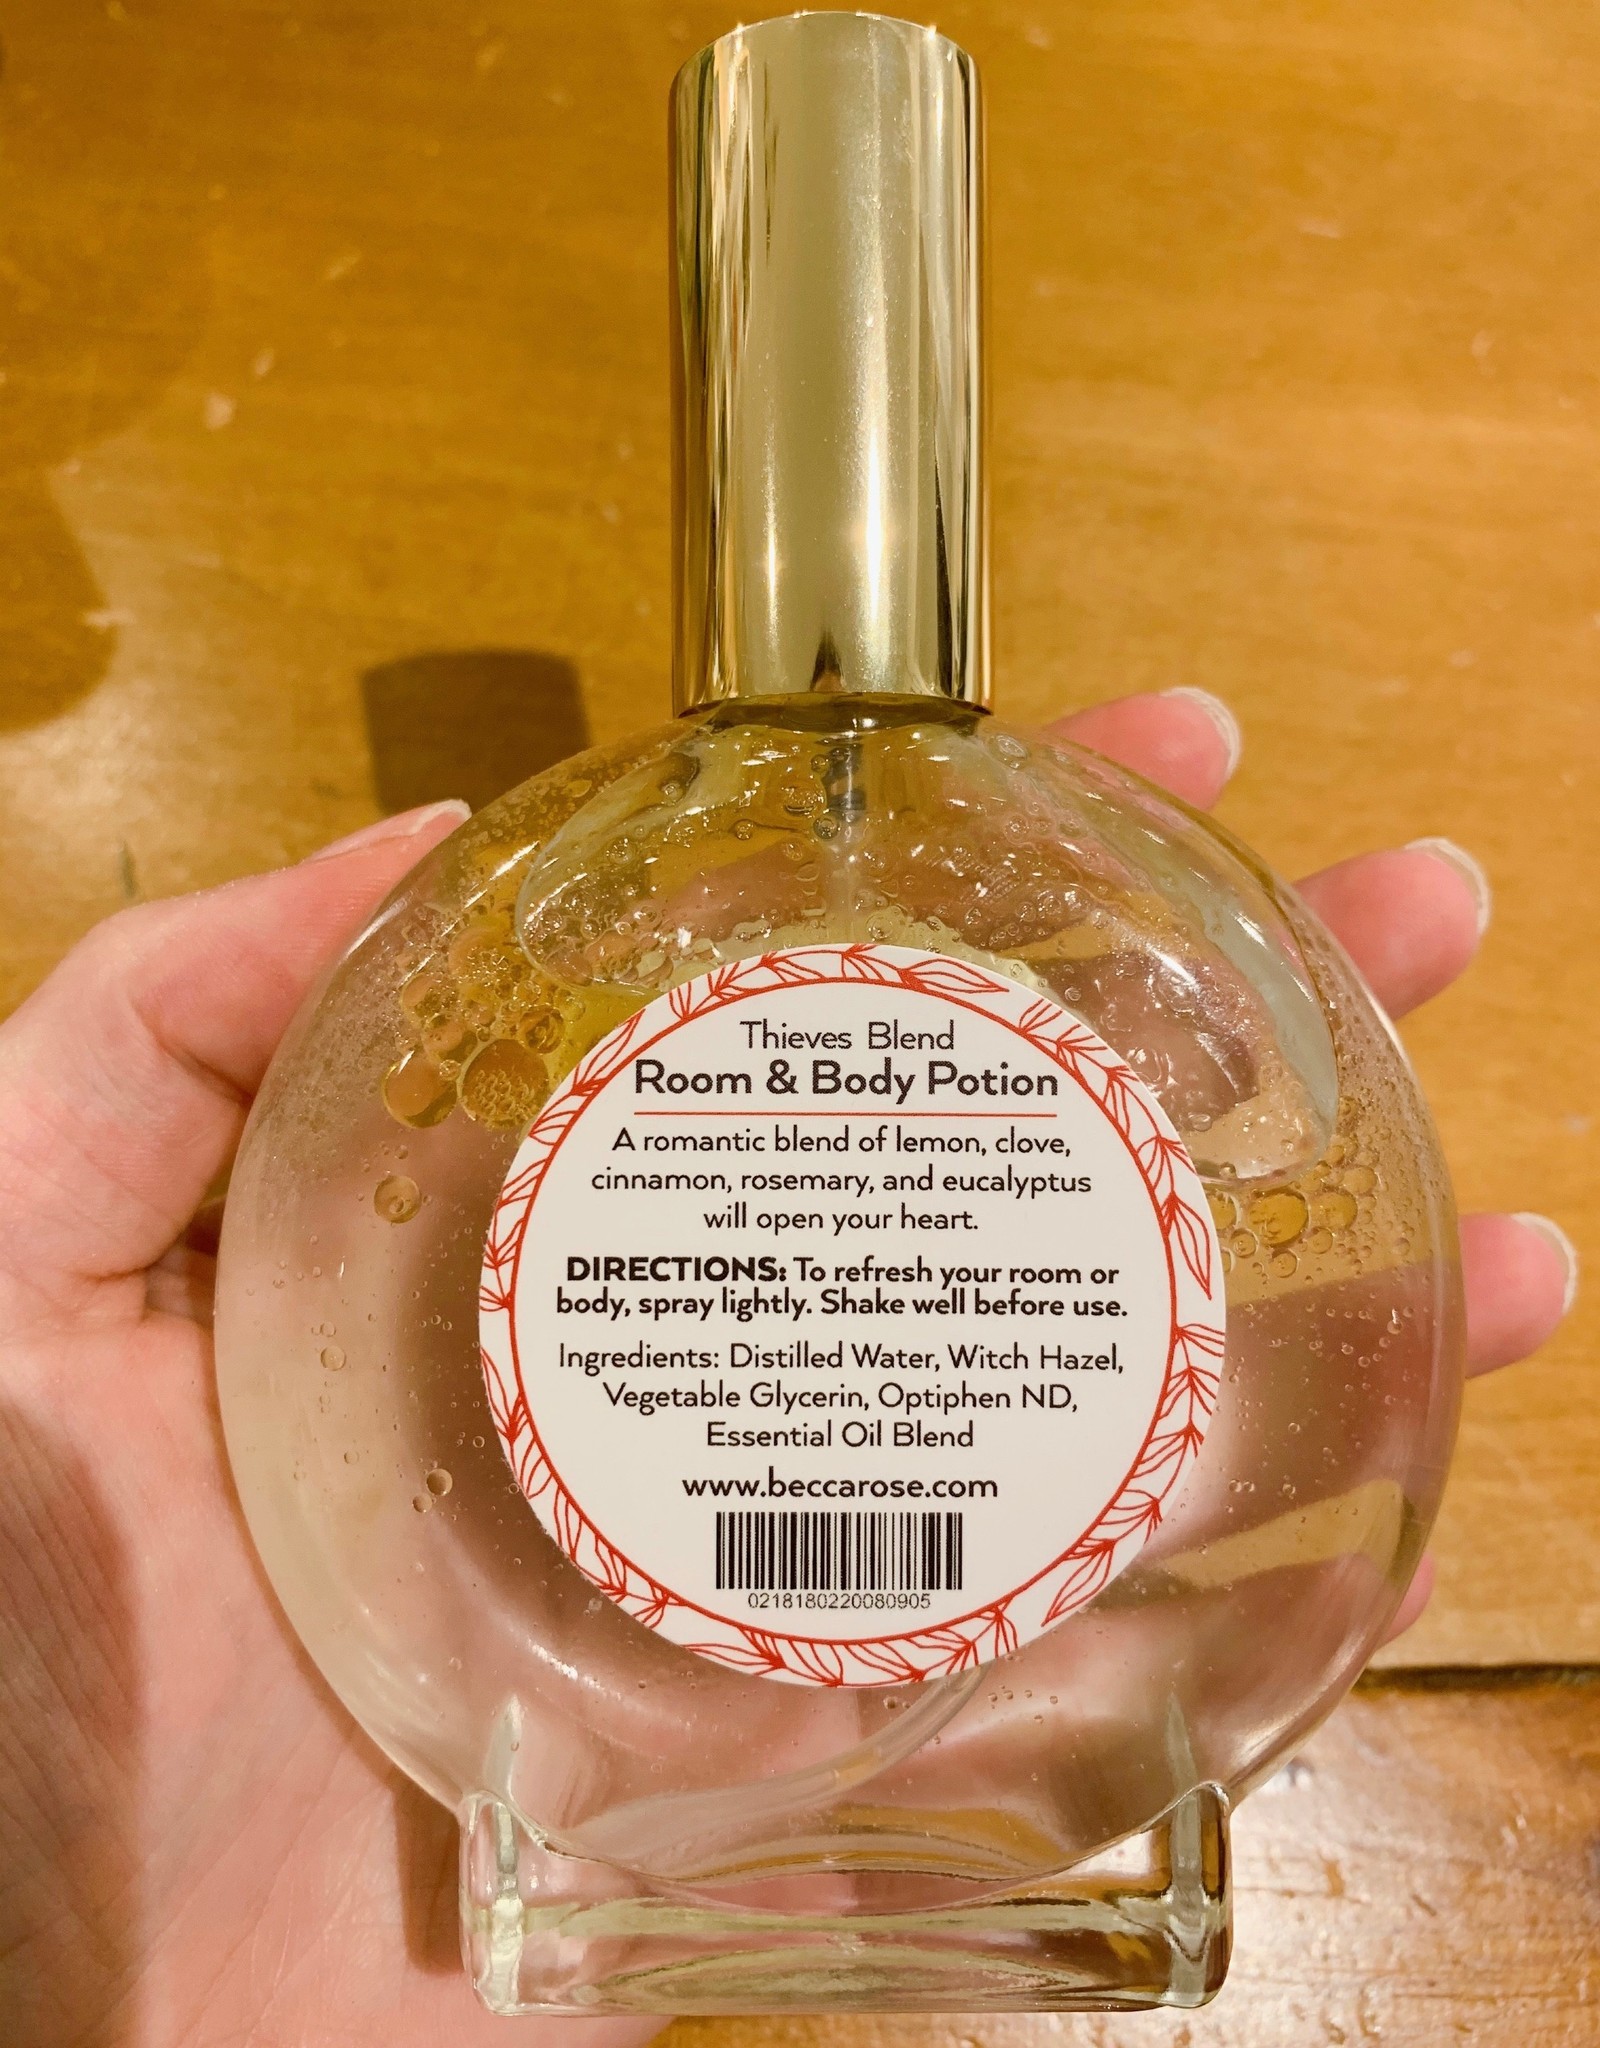 Becca Rose Room & Body Potion: Thieves Blend